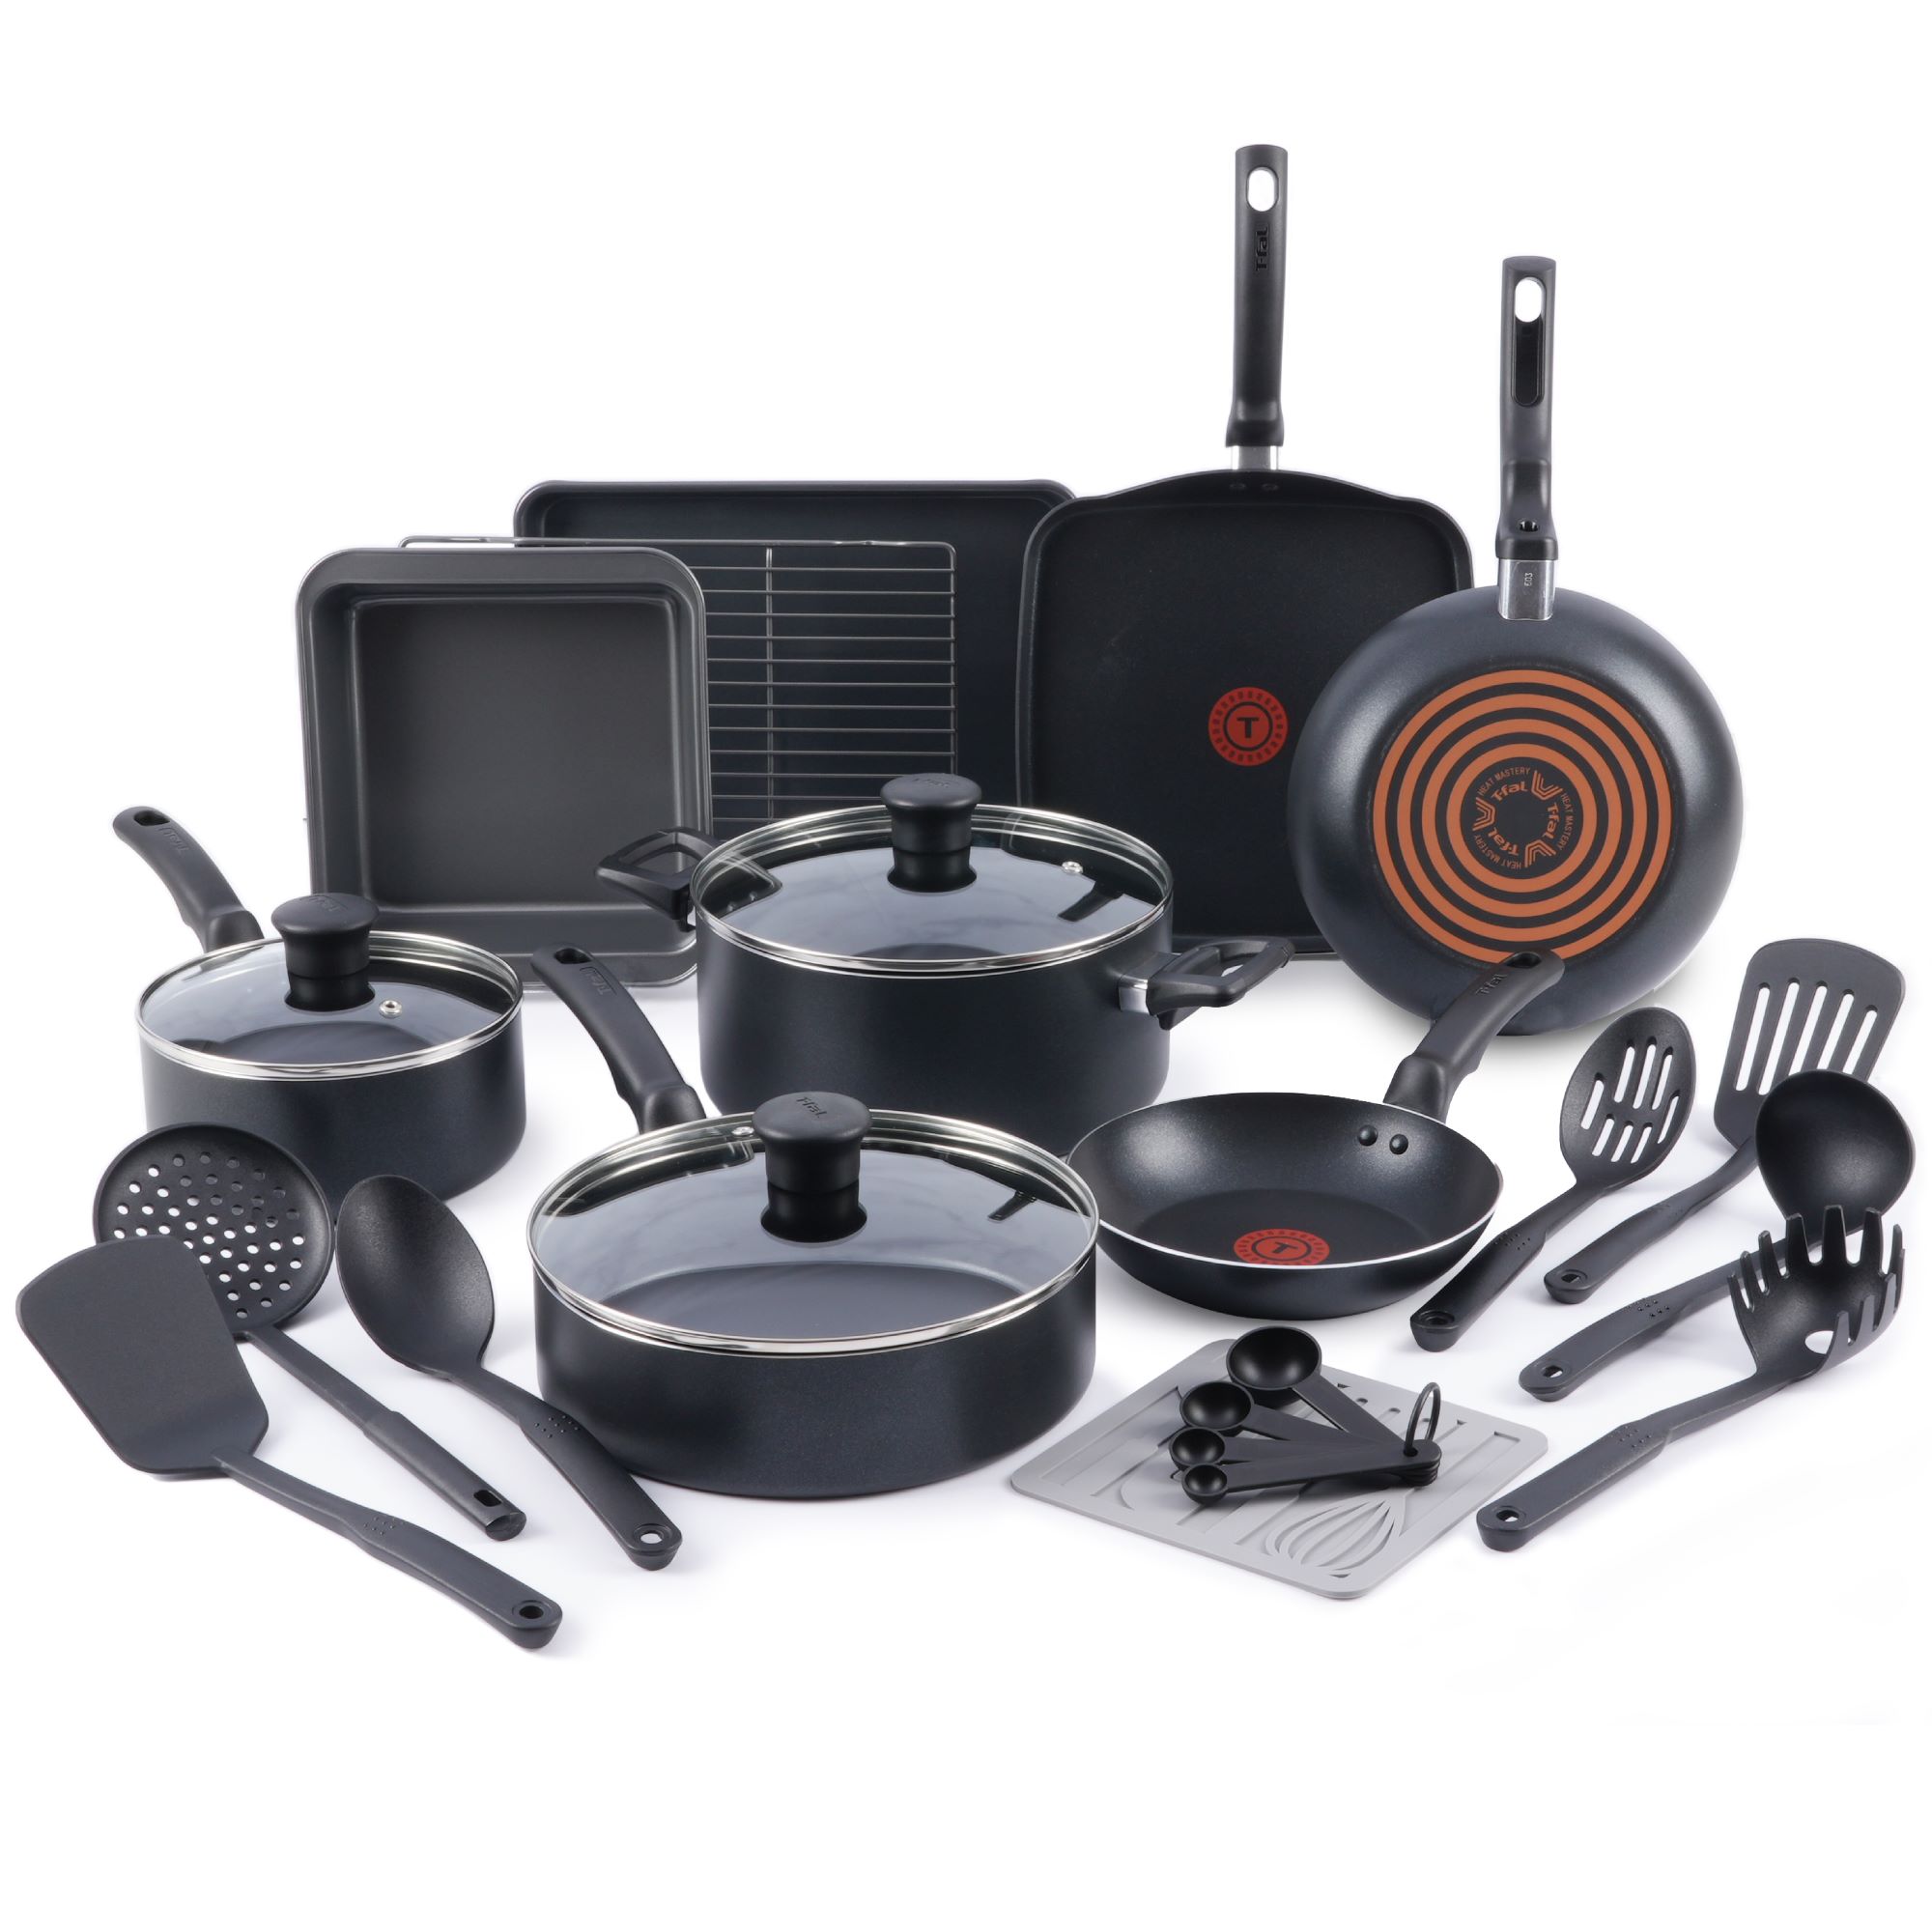 T-fal Kitchen Solutions 21-Piece Nonstick Cookware Set, Black - image 1 of 11